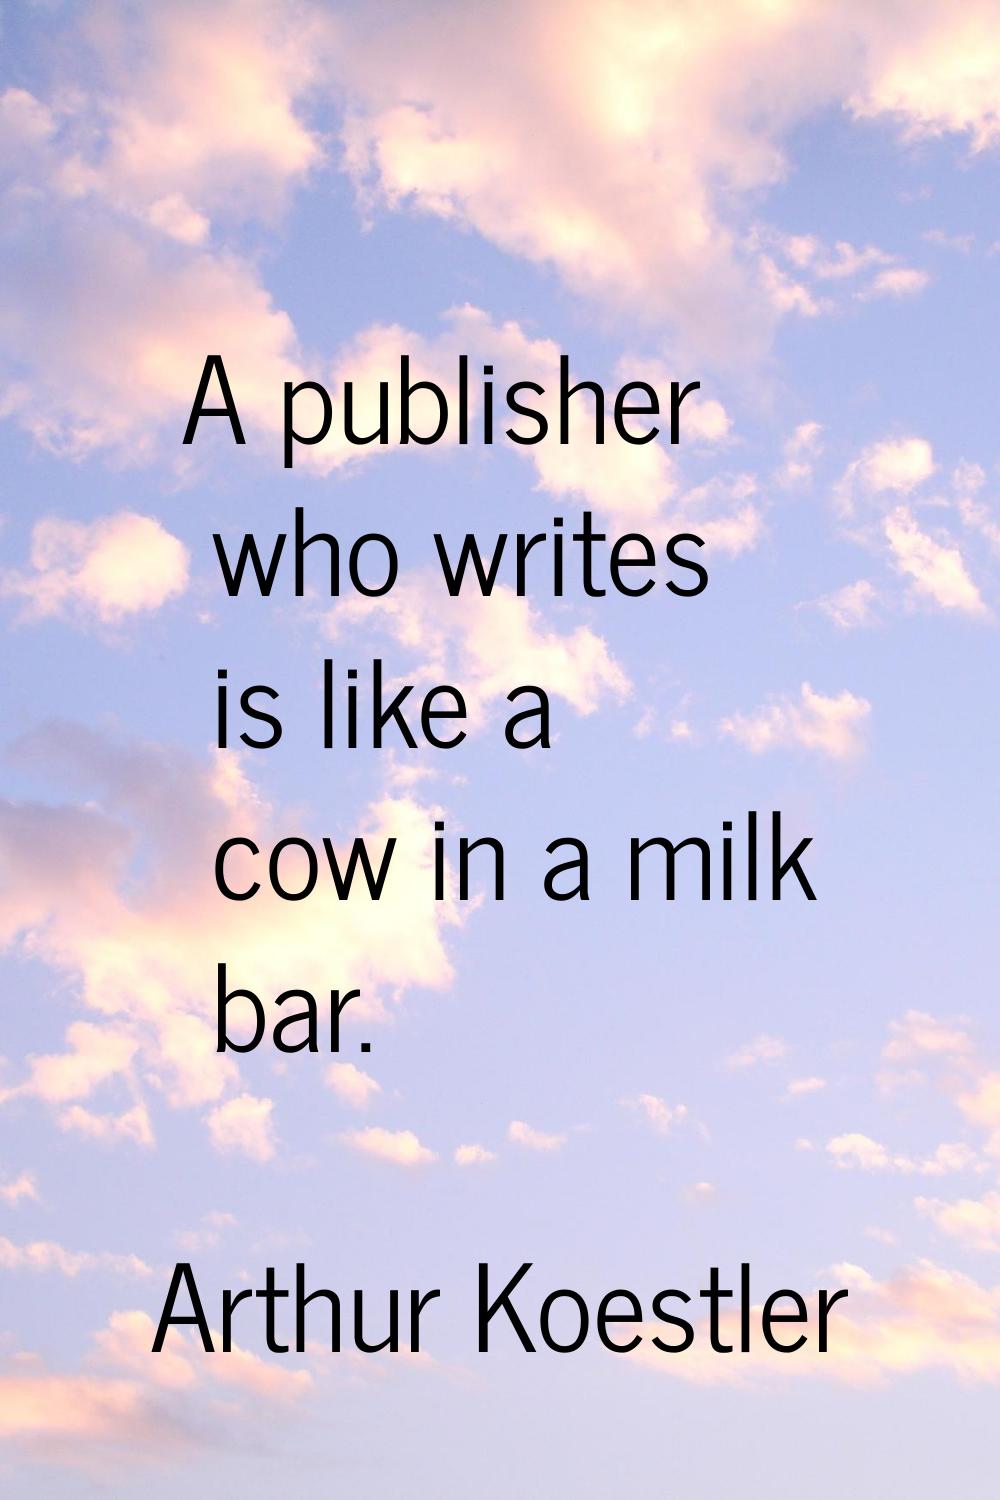 A publisher who writes is like a cow in a milk bar.